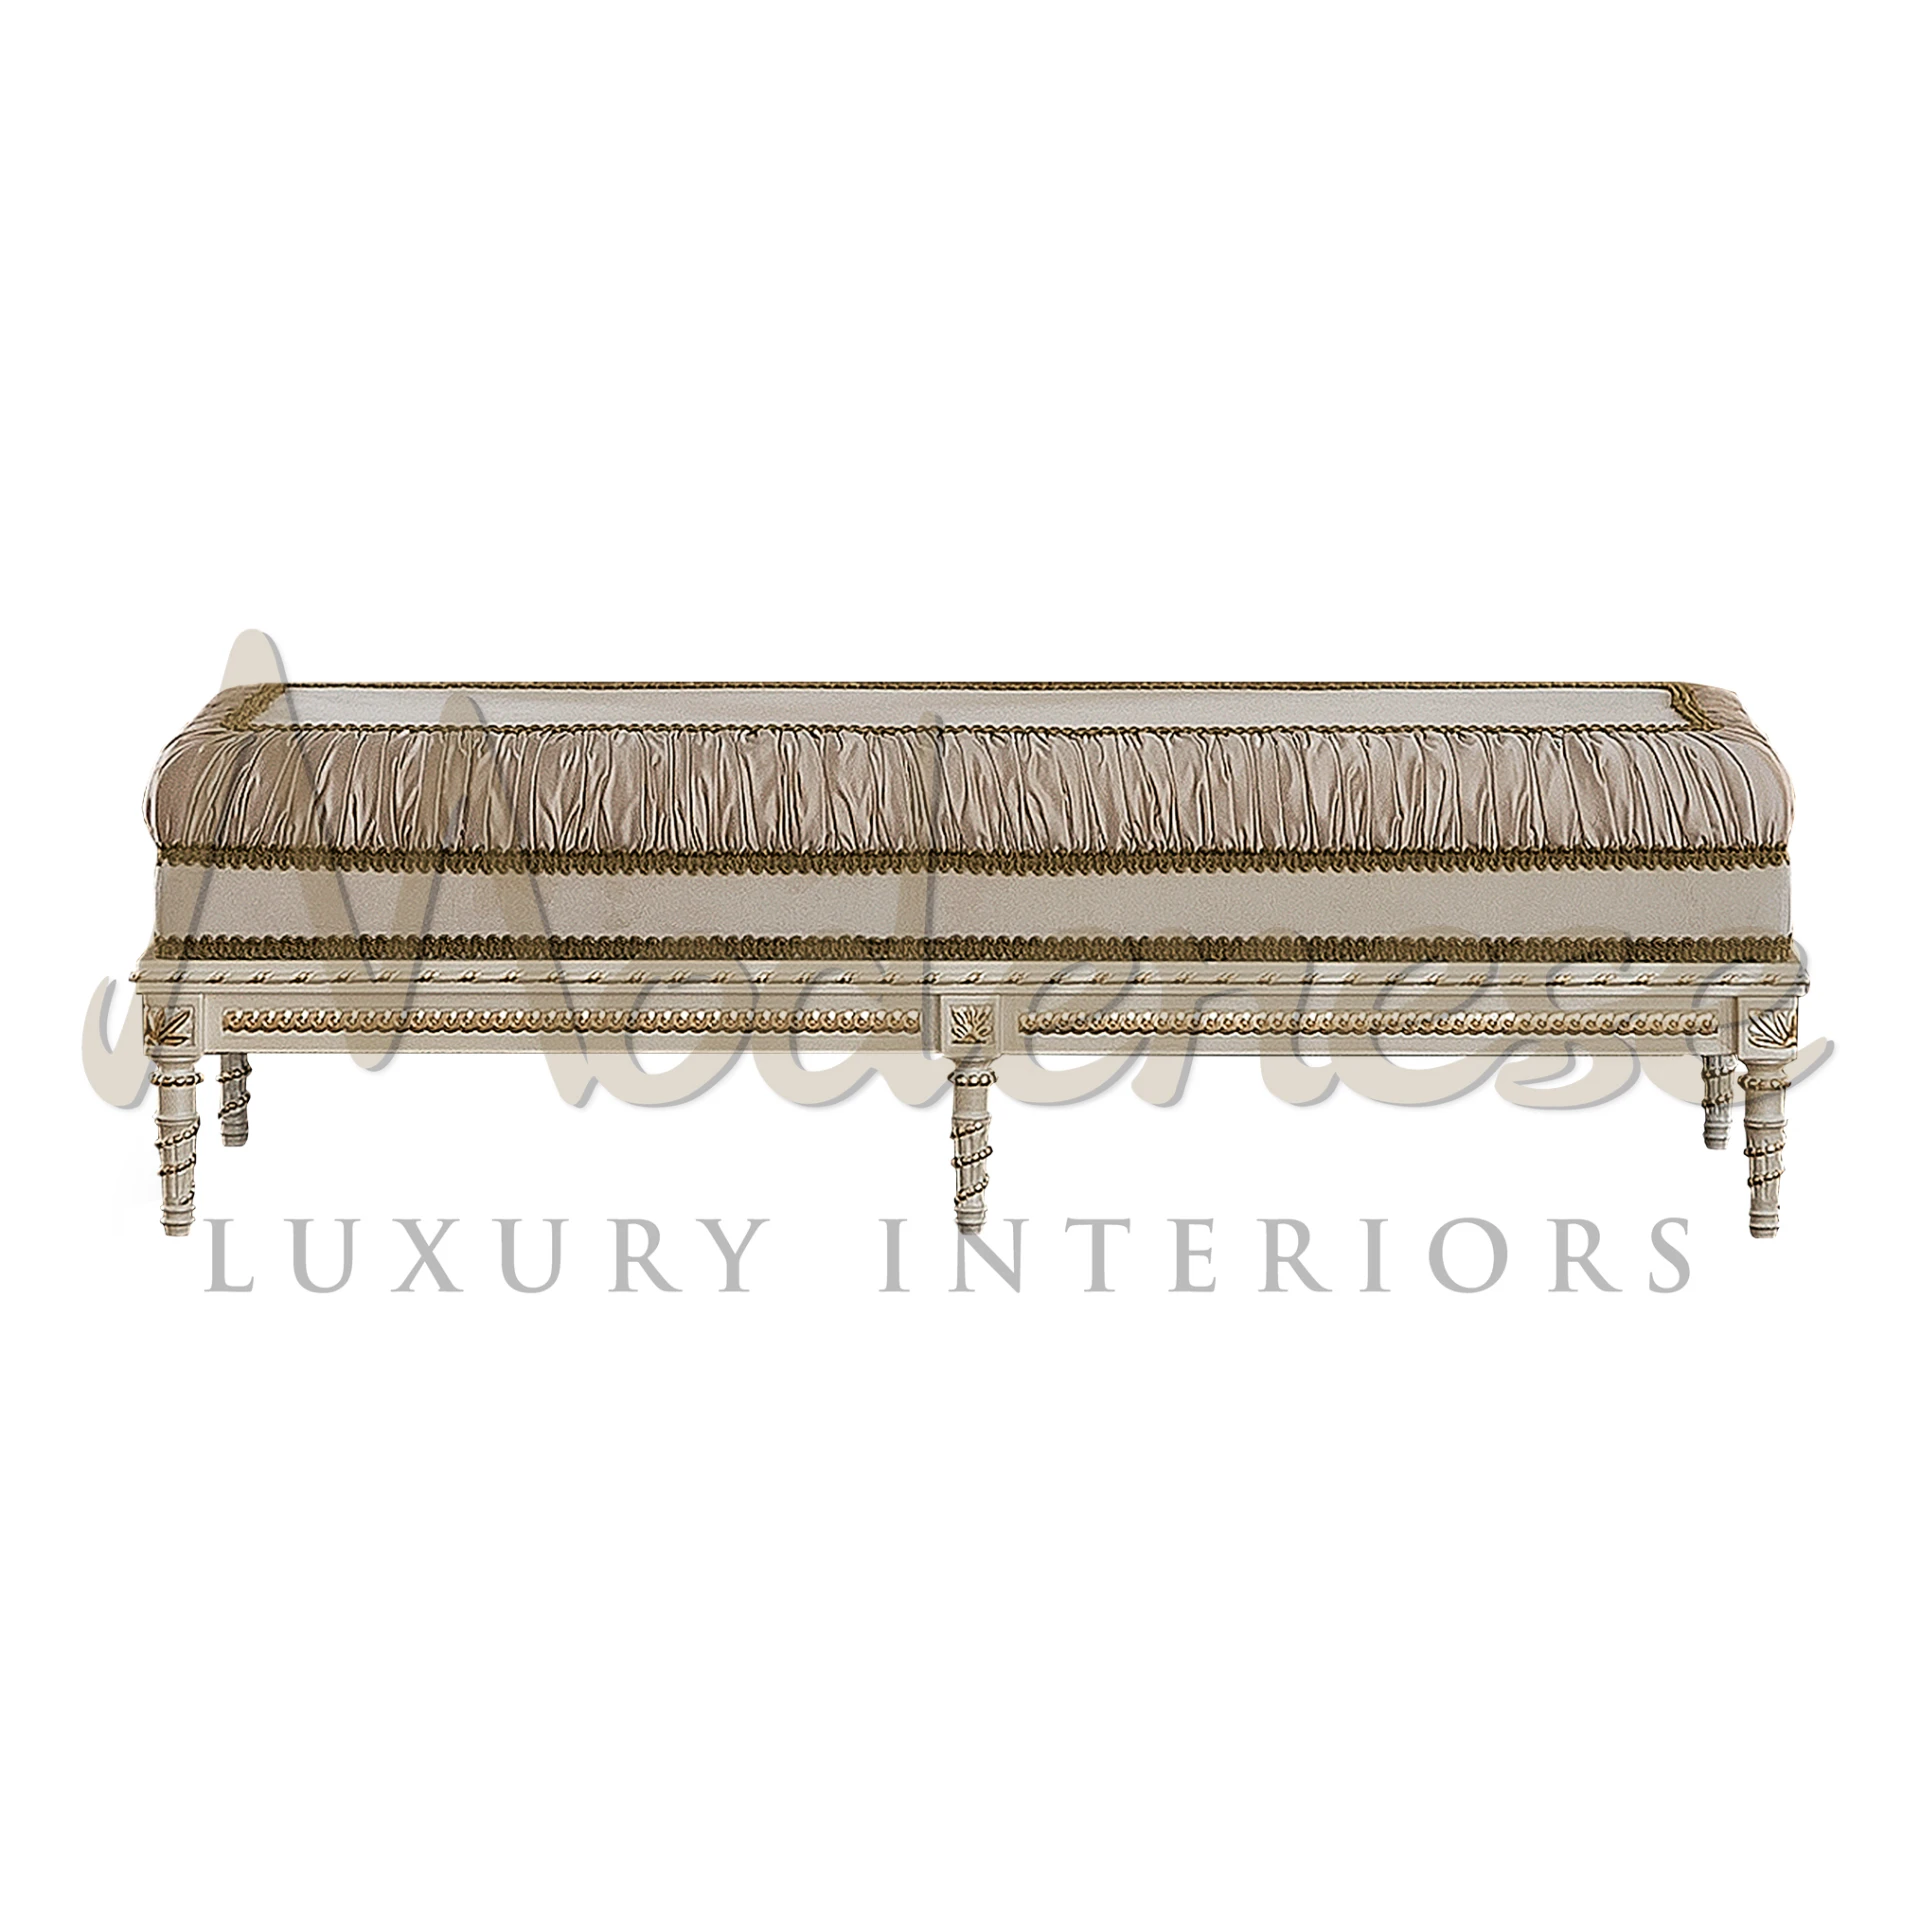 Beige upholstered bench with decorative fringe and ornate white legs.                                                                                                                     